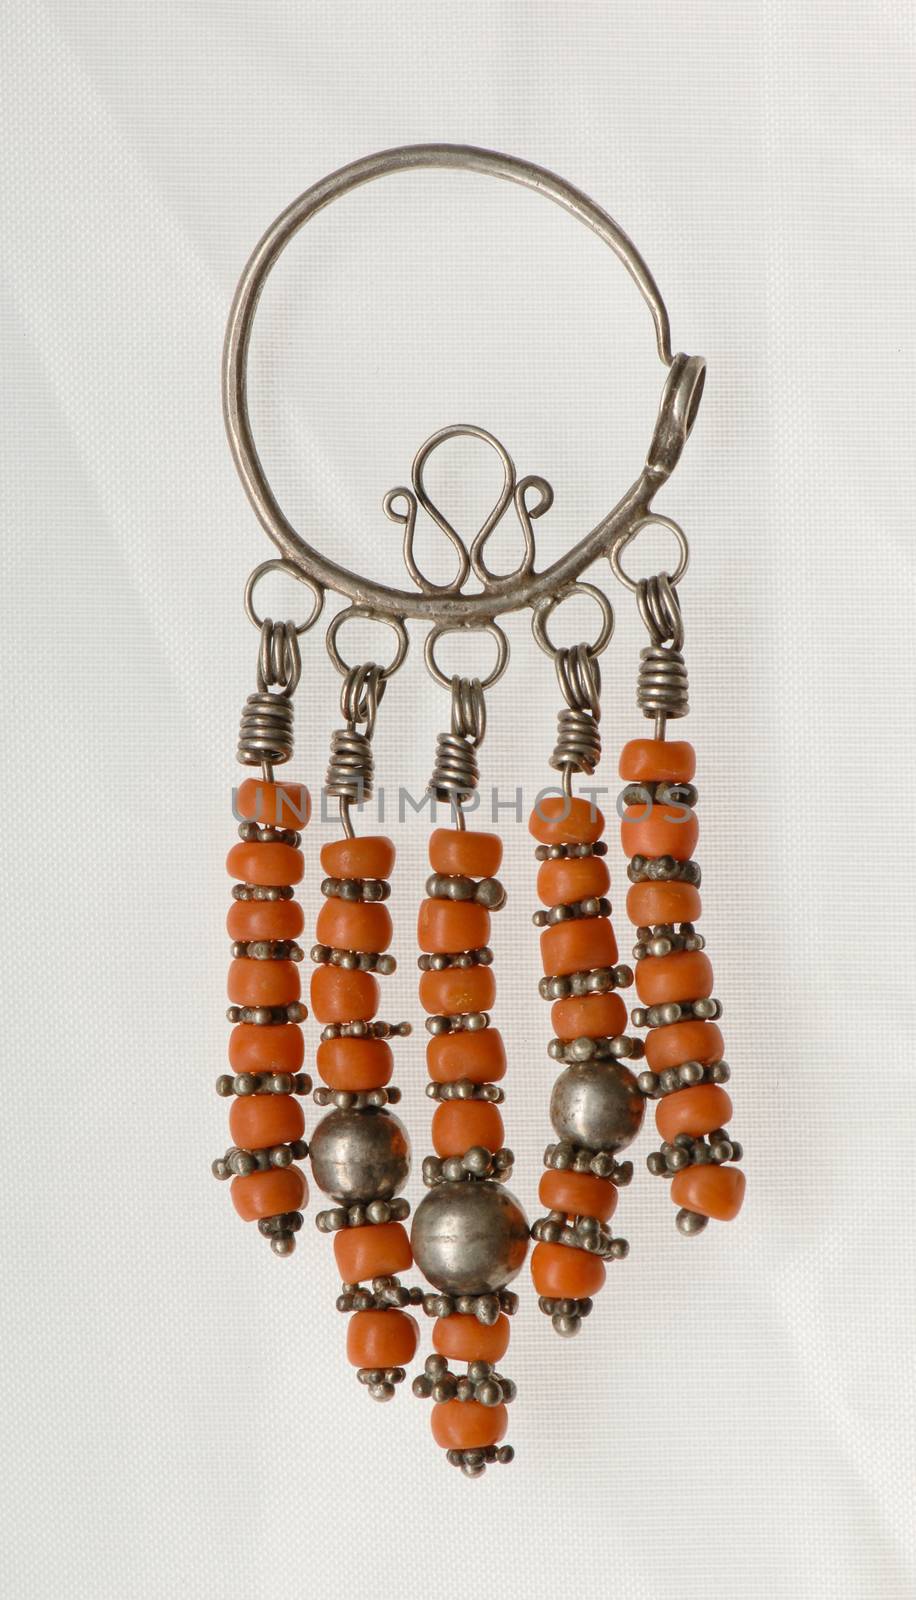 ancient Oriental earrings with precious stones on a textured white background